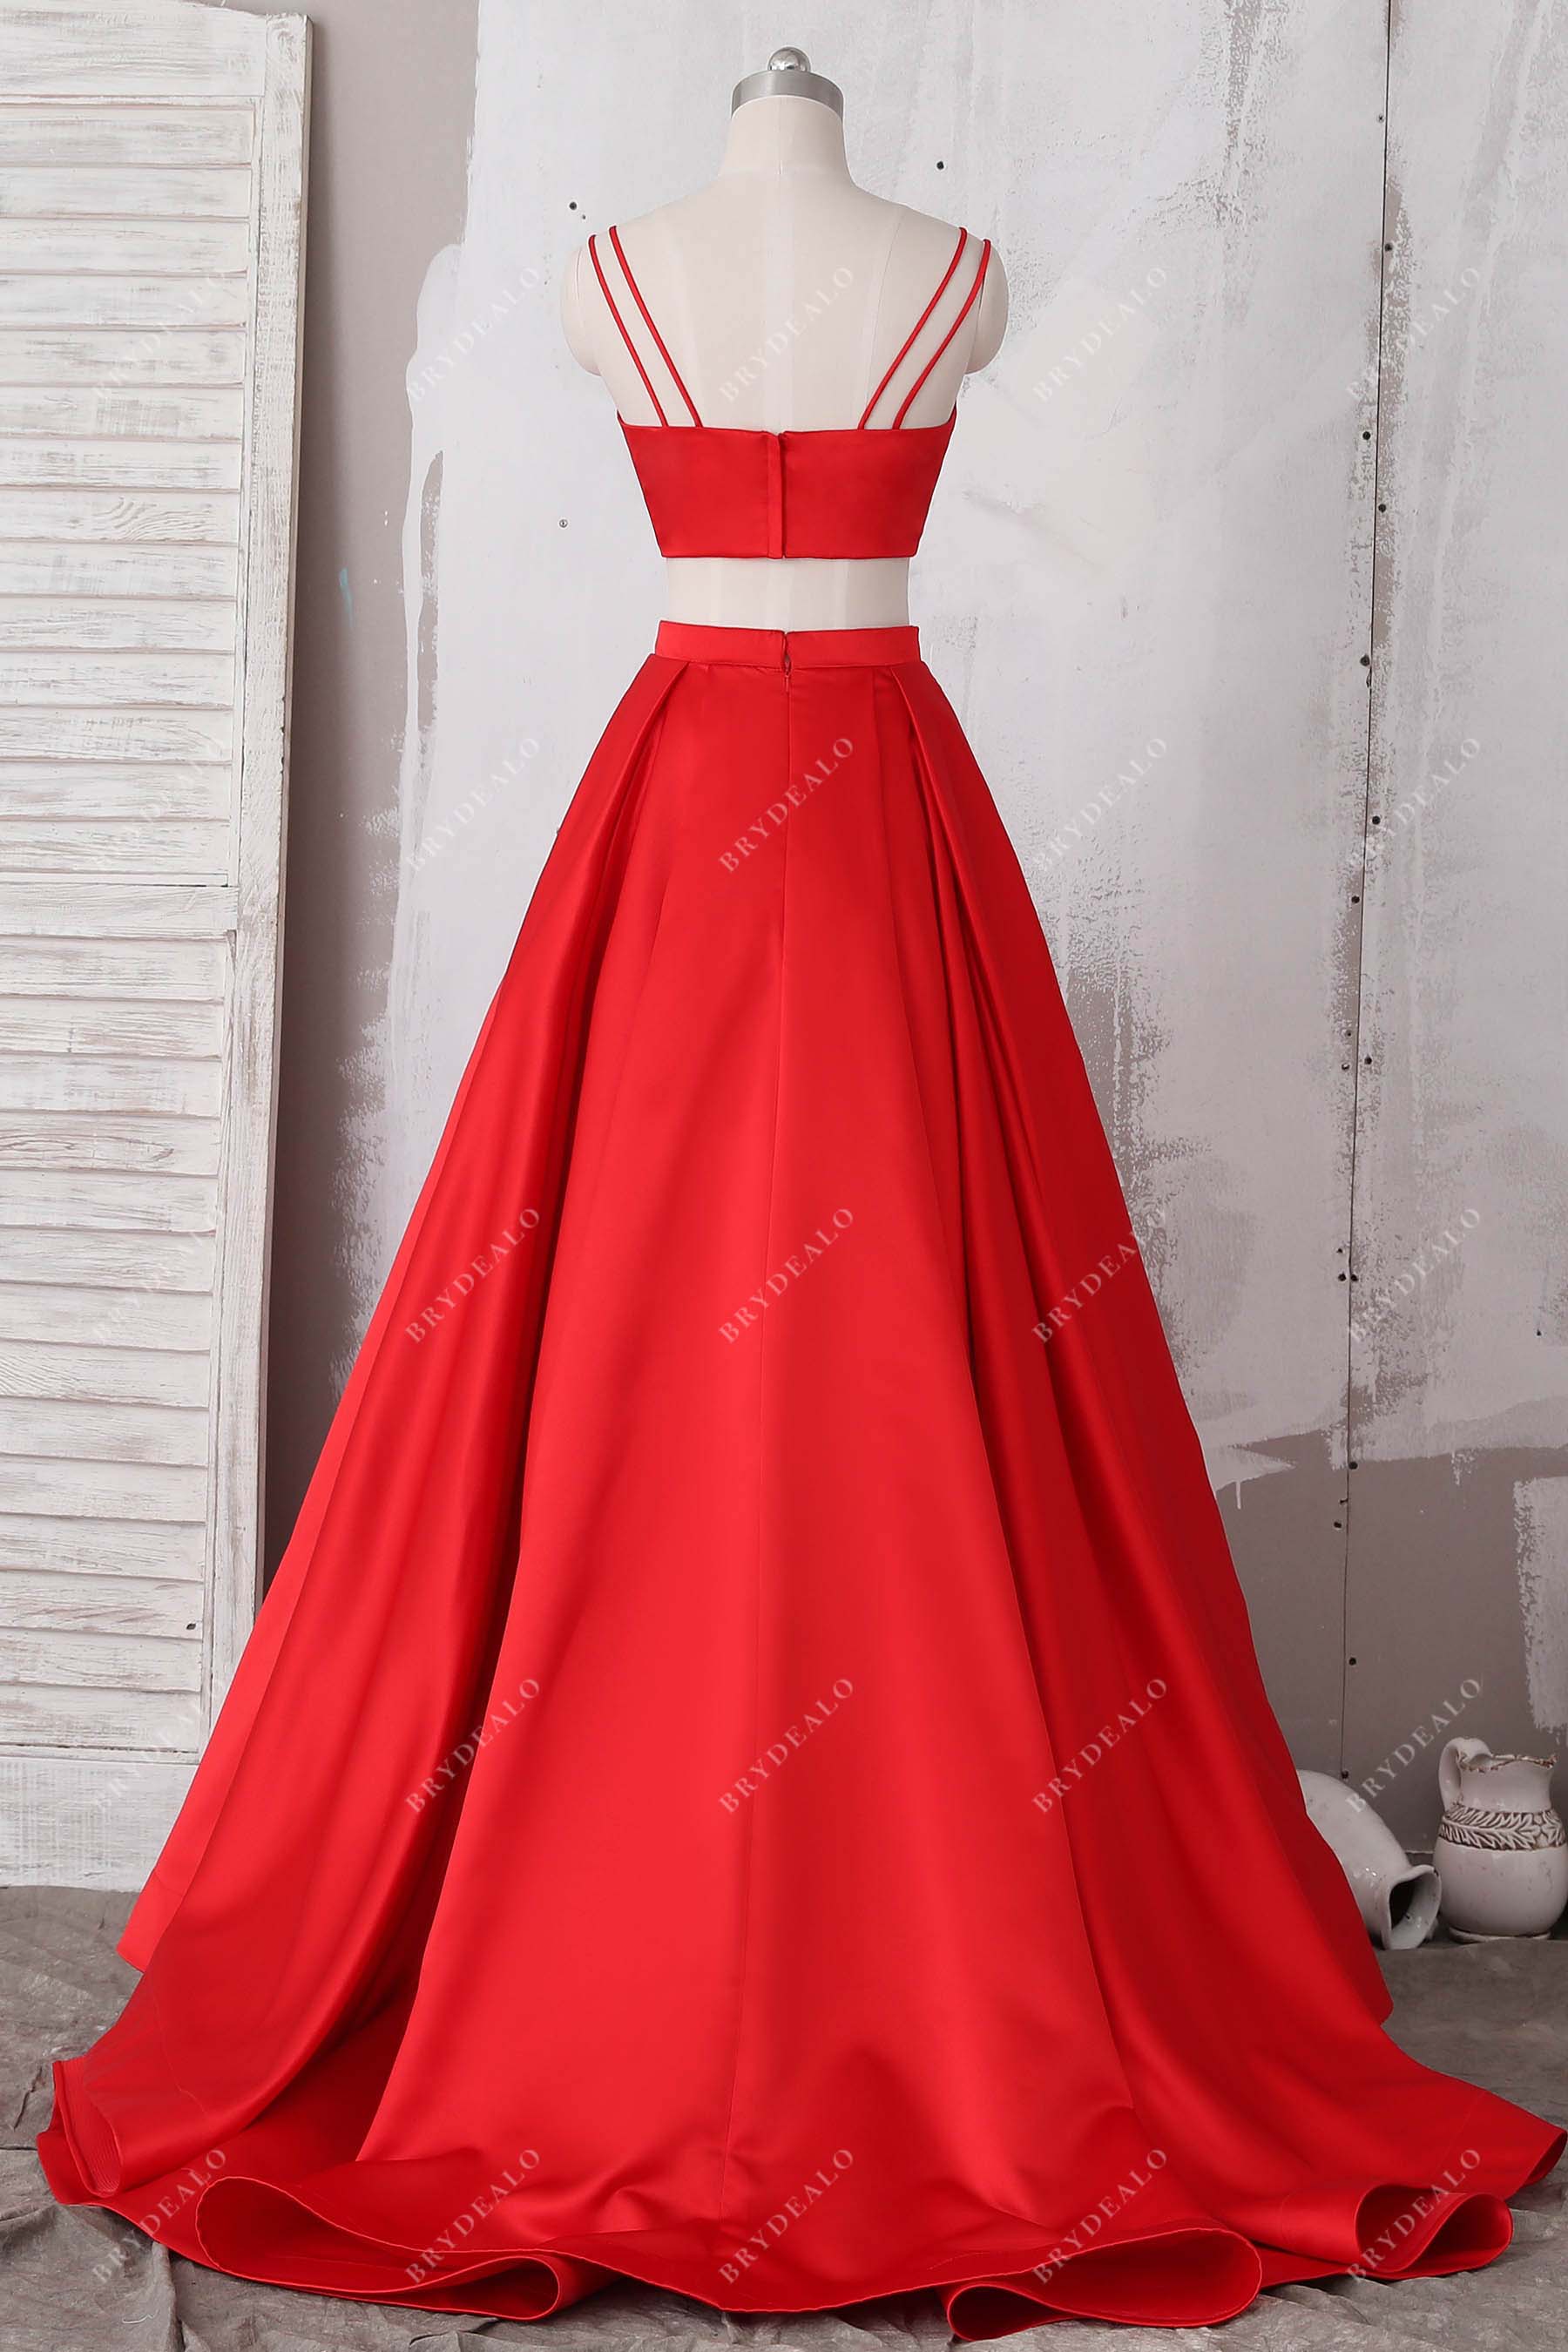 double thin straps red satin formal dress